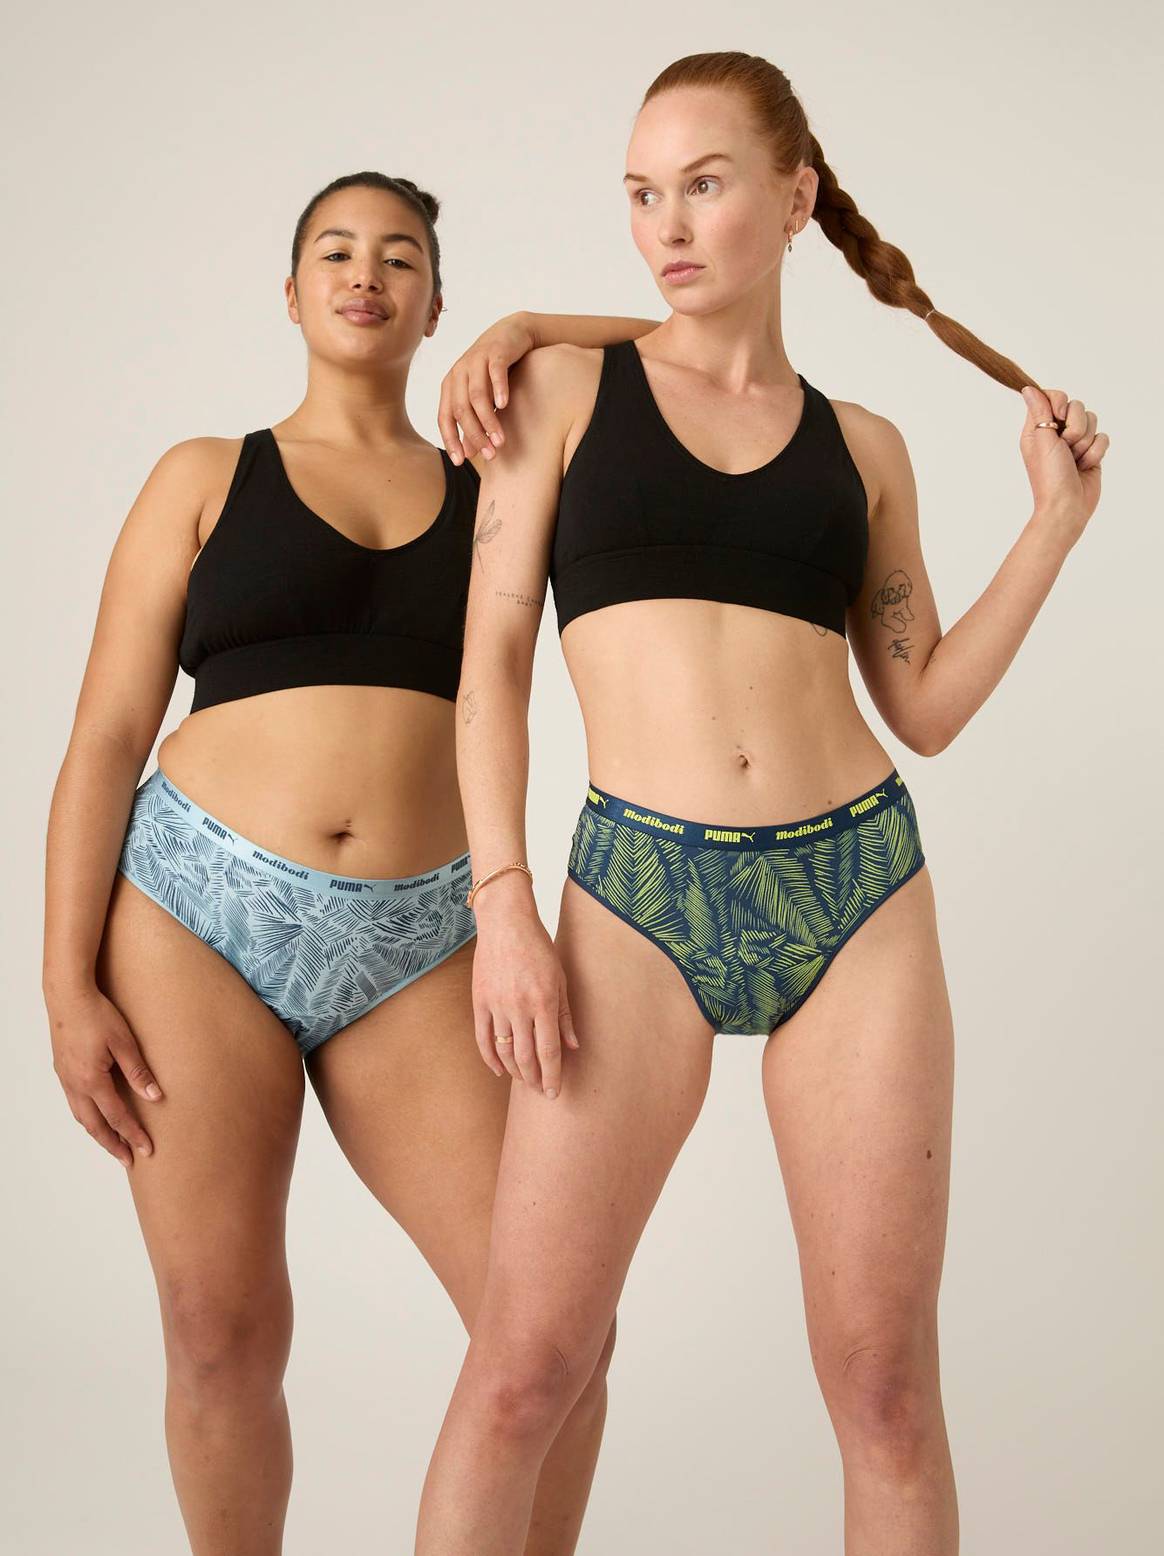 Rise of the period panties: Modibodi's Kerry Cusack on the